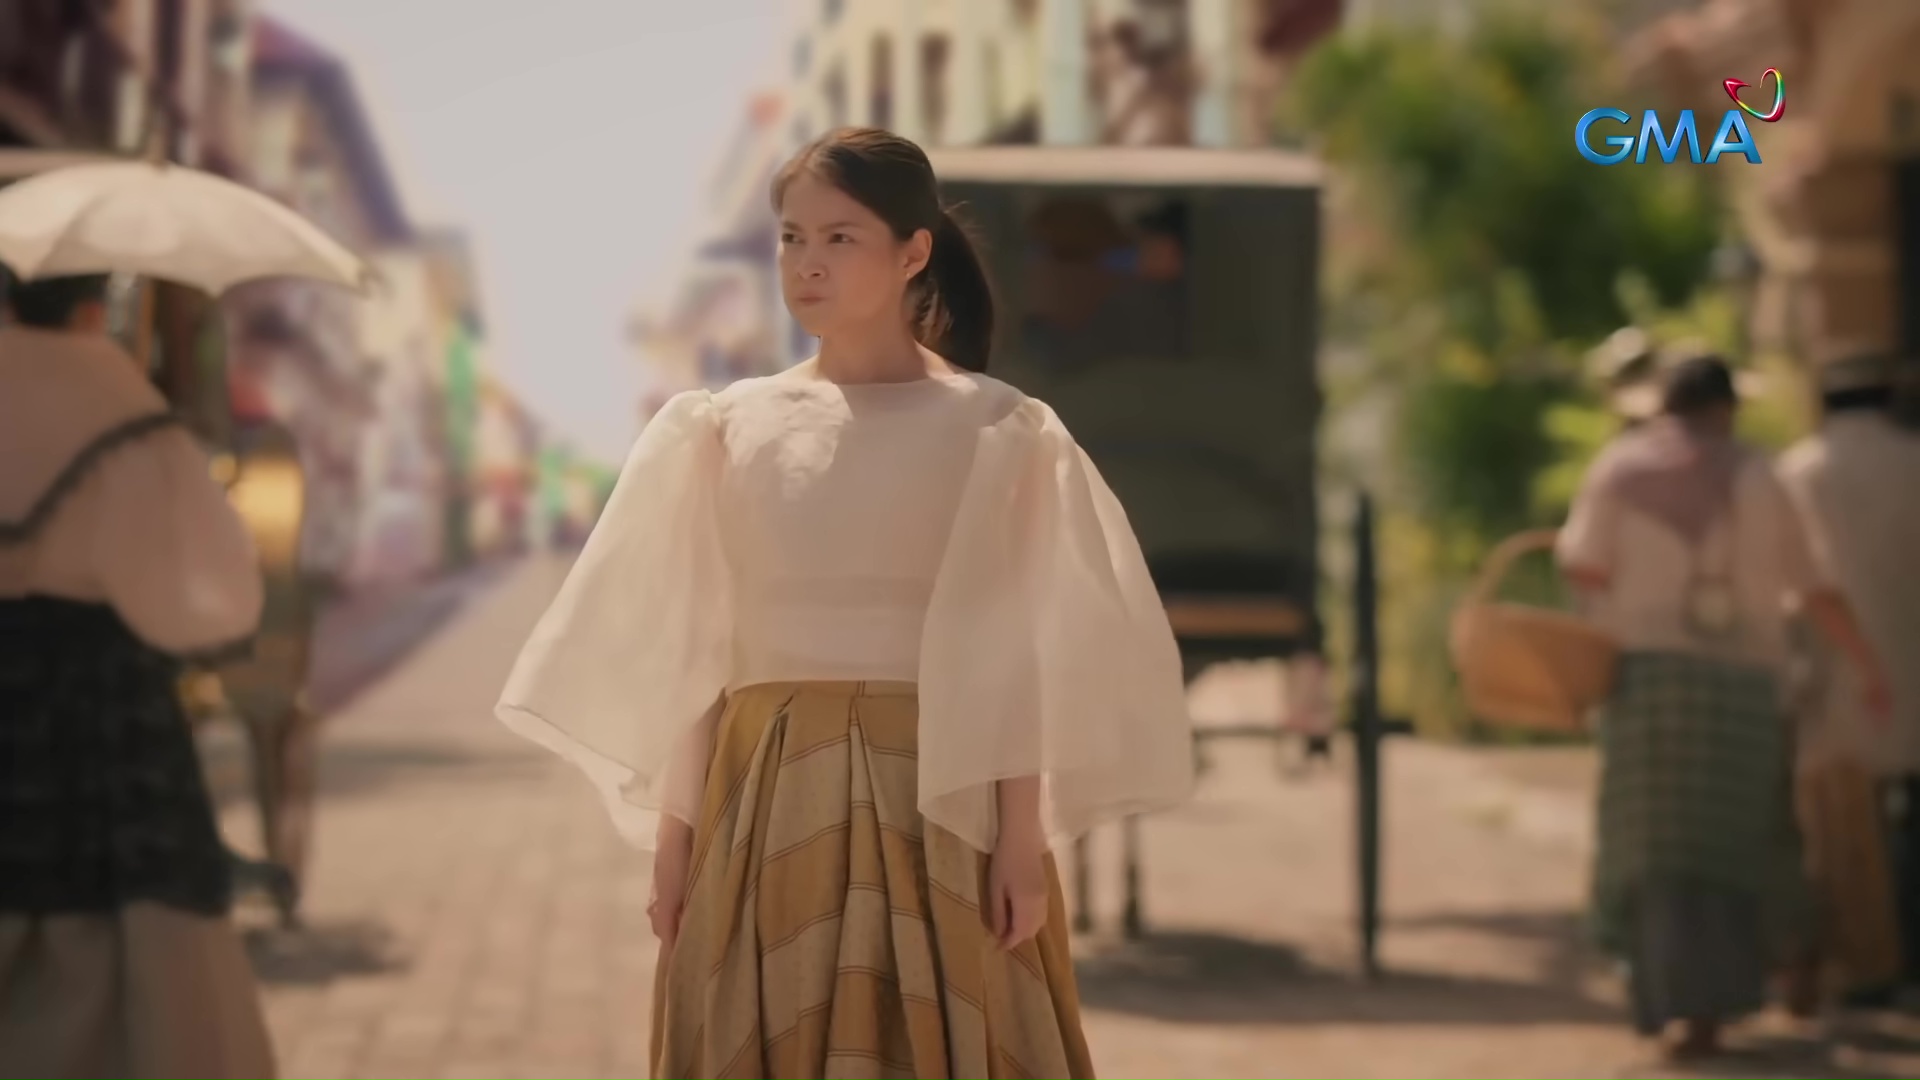 First Impression Review: GMA’s “Maria Clara at Ibarra” Delivers a Creative, Timely and Thoroughly Engaging Twist on Familiar Stories